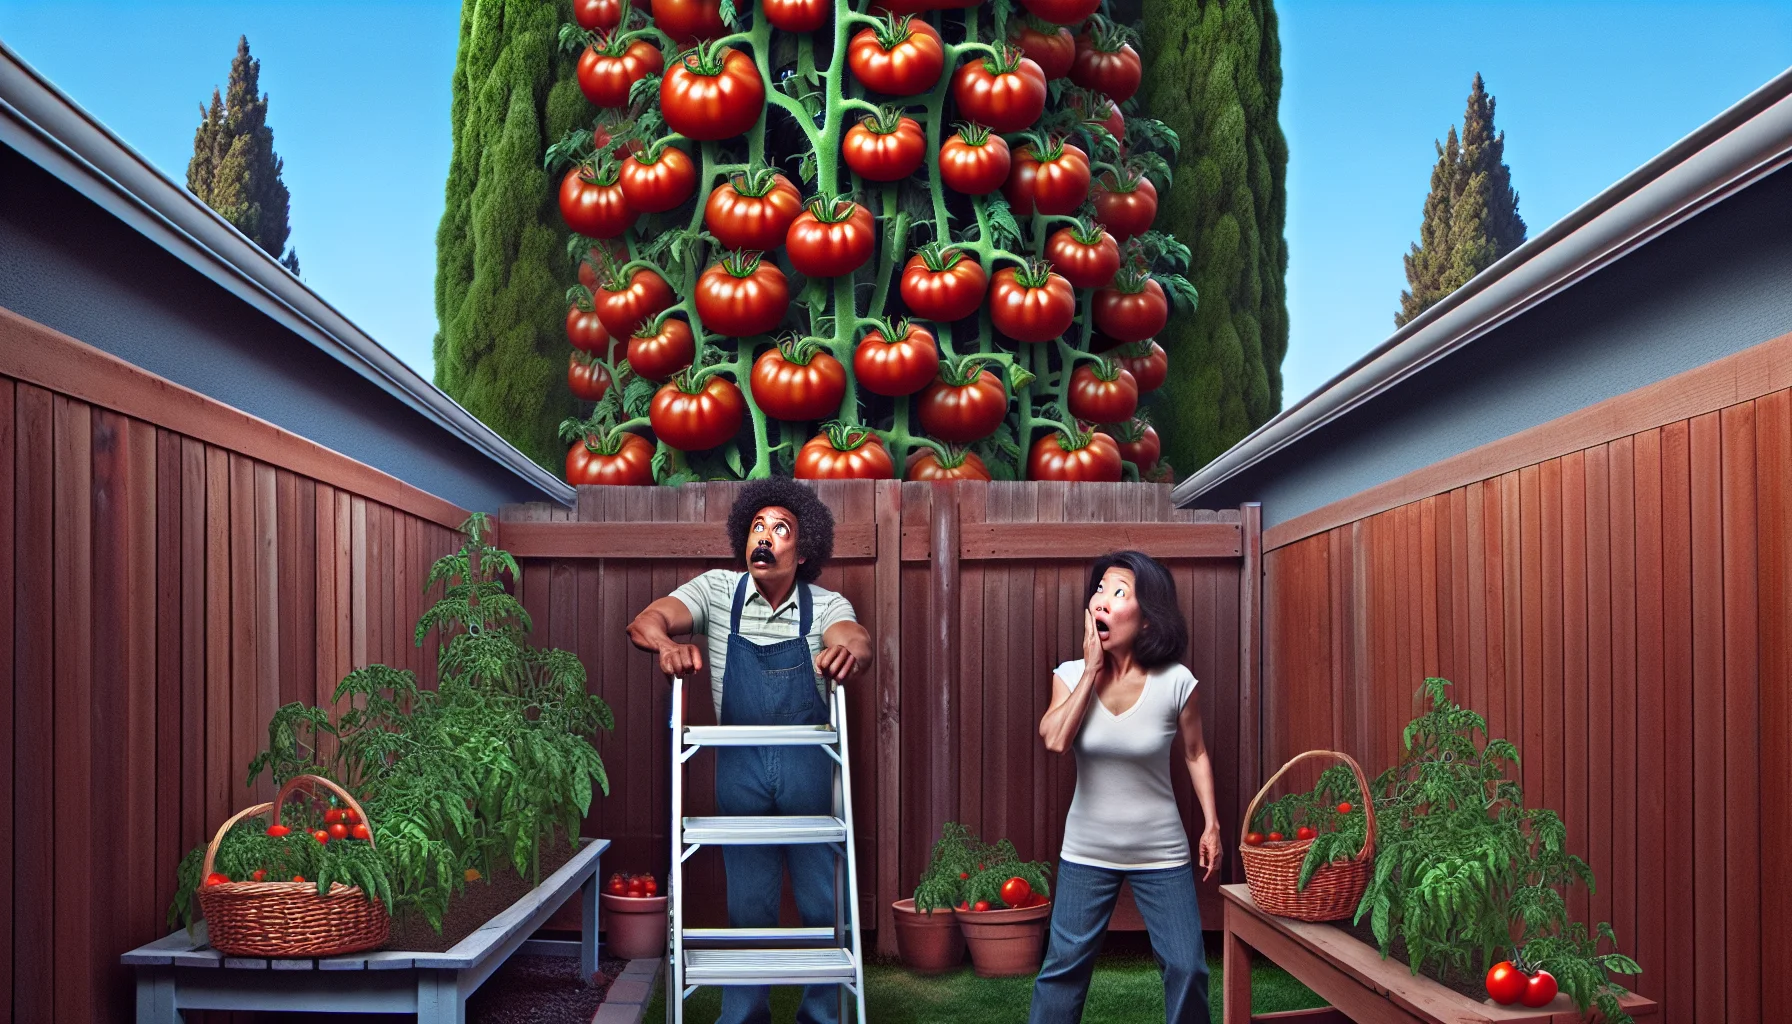 A humorous depiction of a surreal backyard garden where tomato plants have grown to an extreme height, towering above like lush redwood trees. The fruits are of typical size, creating a comical contrast with their tall vines. Below, a surprised gardener, an African-American woman in her 40s, is gazing up at the towering plants with a stepladder at her side, making a playful comment about needing a taller ladder. Her Asian male neighbor in his 30s is peeking over the fence, eyes wide in astonishment. This fun, exaggerated scene inspires and reminds us to engage and find joy in gardening activities.